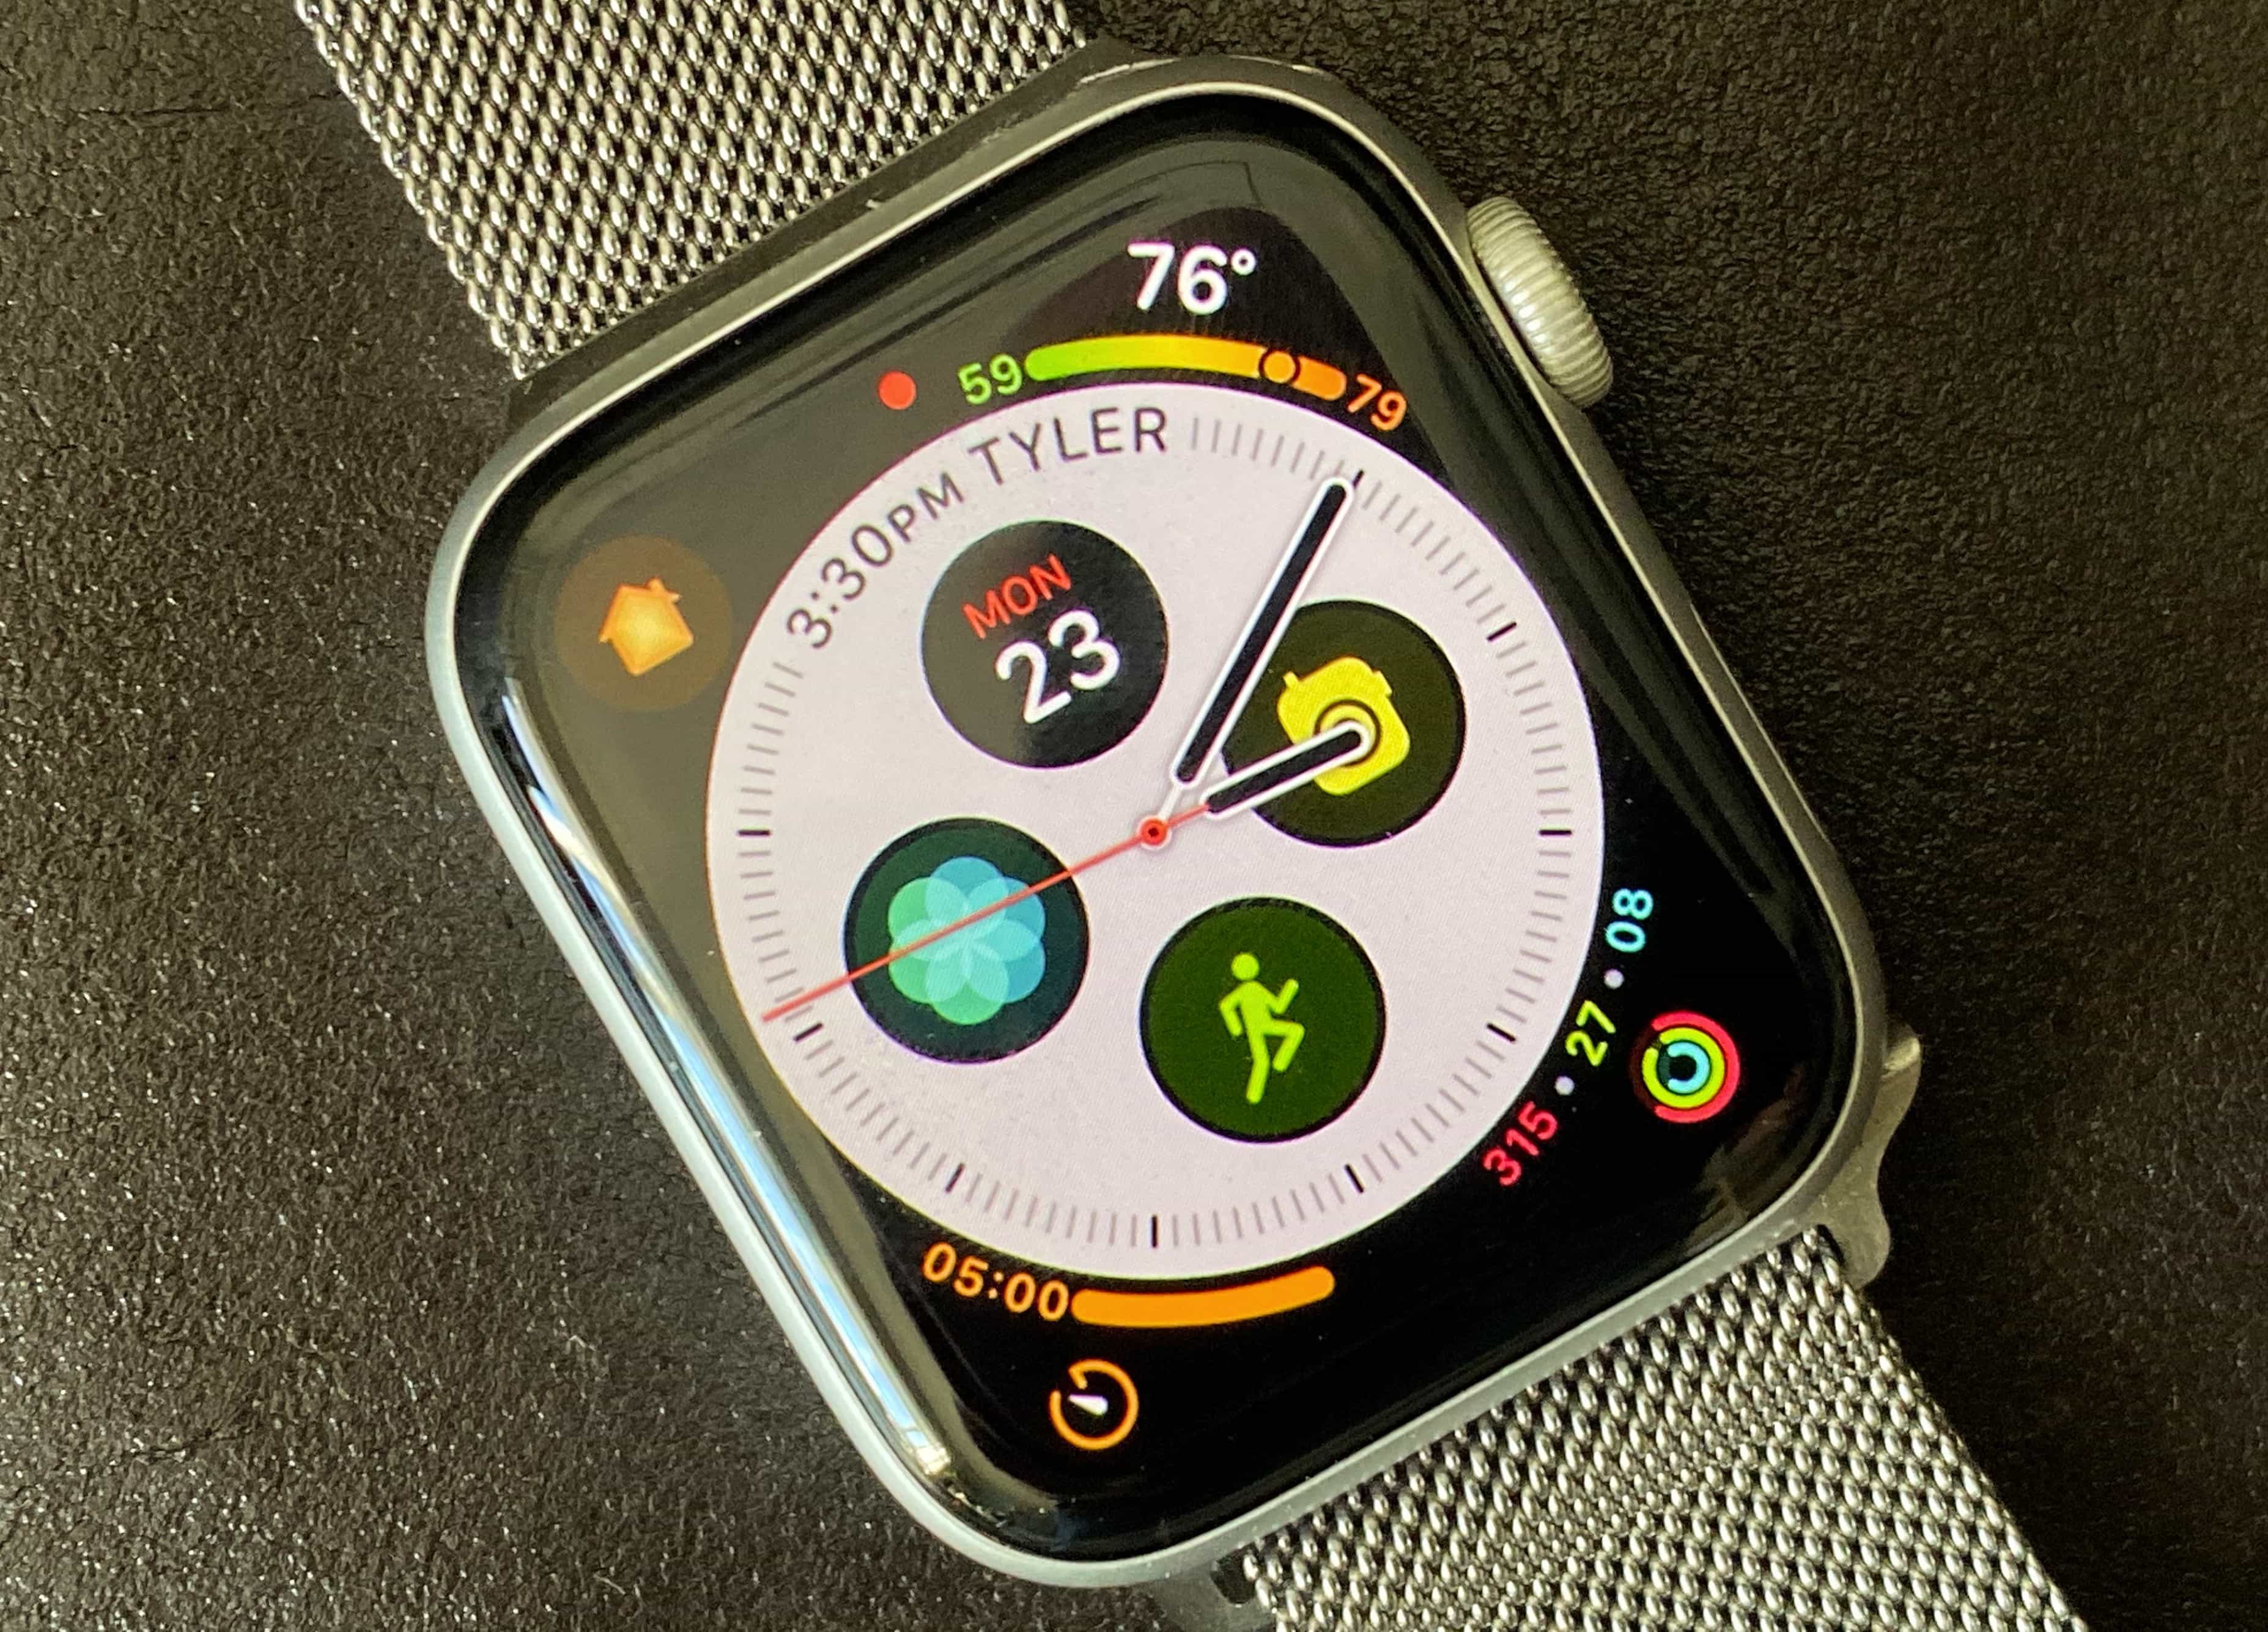 Get Apple Watch and iOS how-tos in this week's issue.